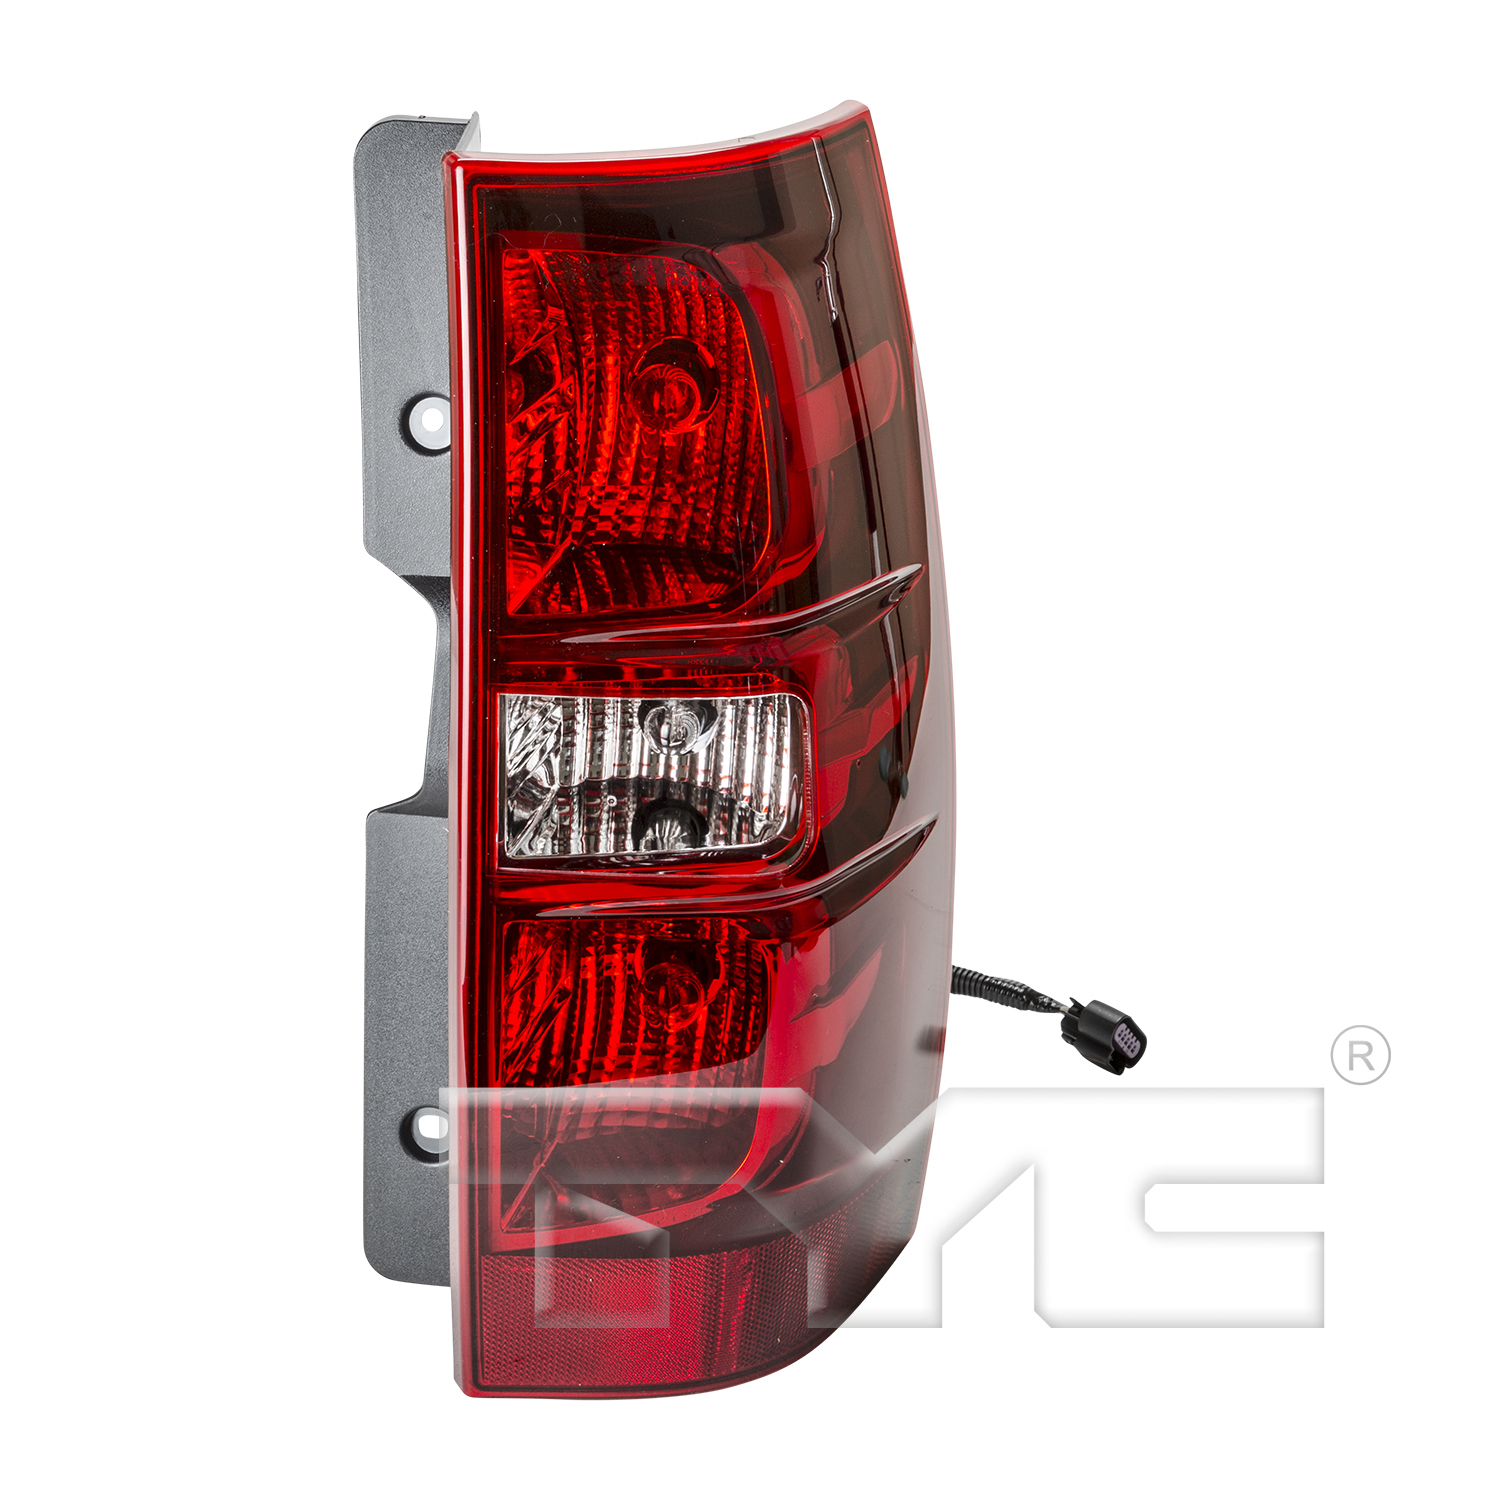 Aftermarket TAILLIGHTS for CHEVROLET - SUBURBAN 1500, SUBURBAN 1500,07-14,RT Taillamp assy